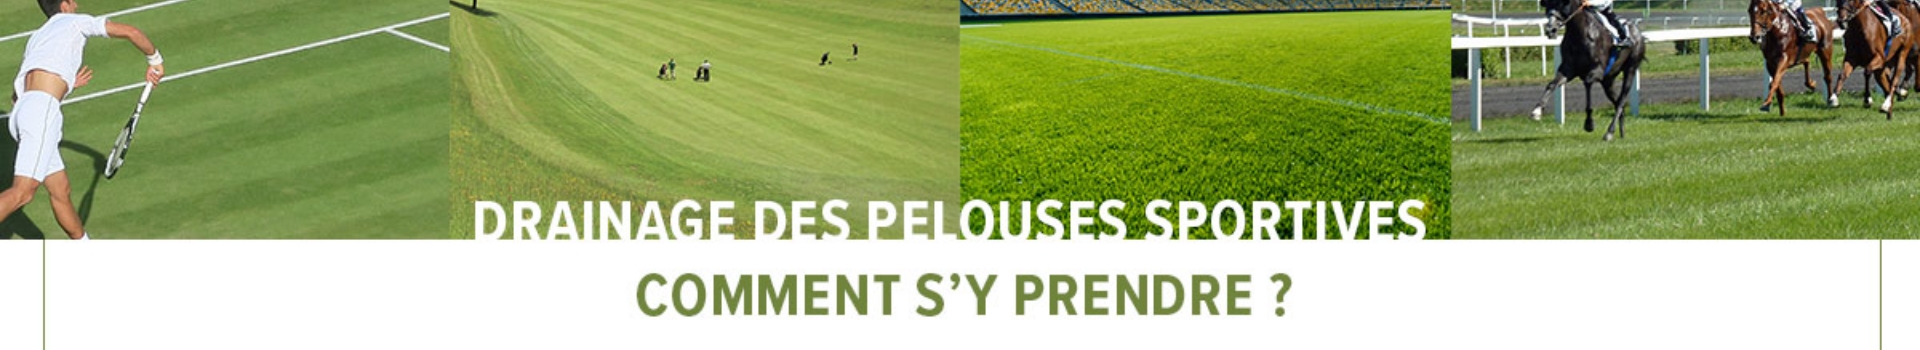 ATE_article_comment_drainer_pelouse_sportive2_banner